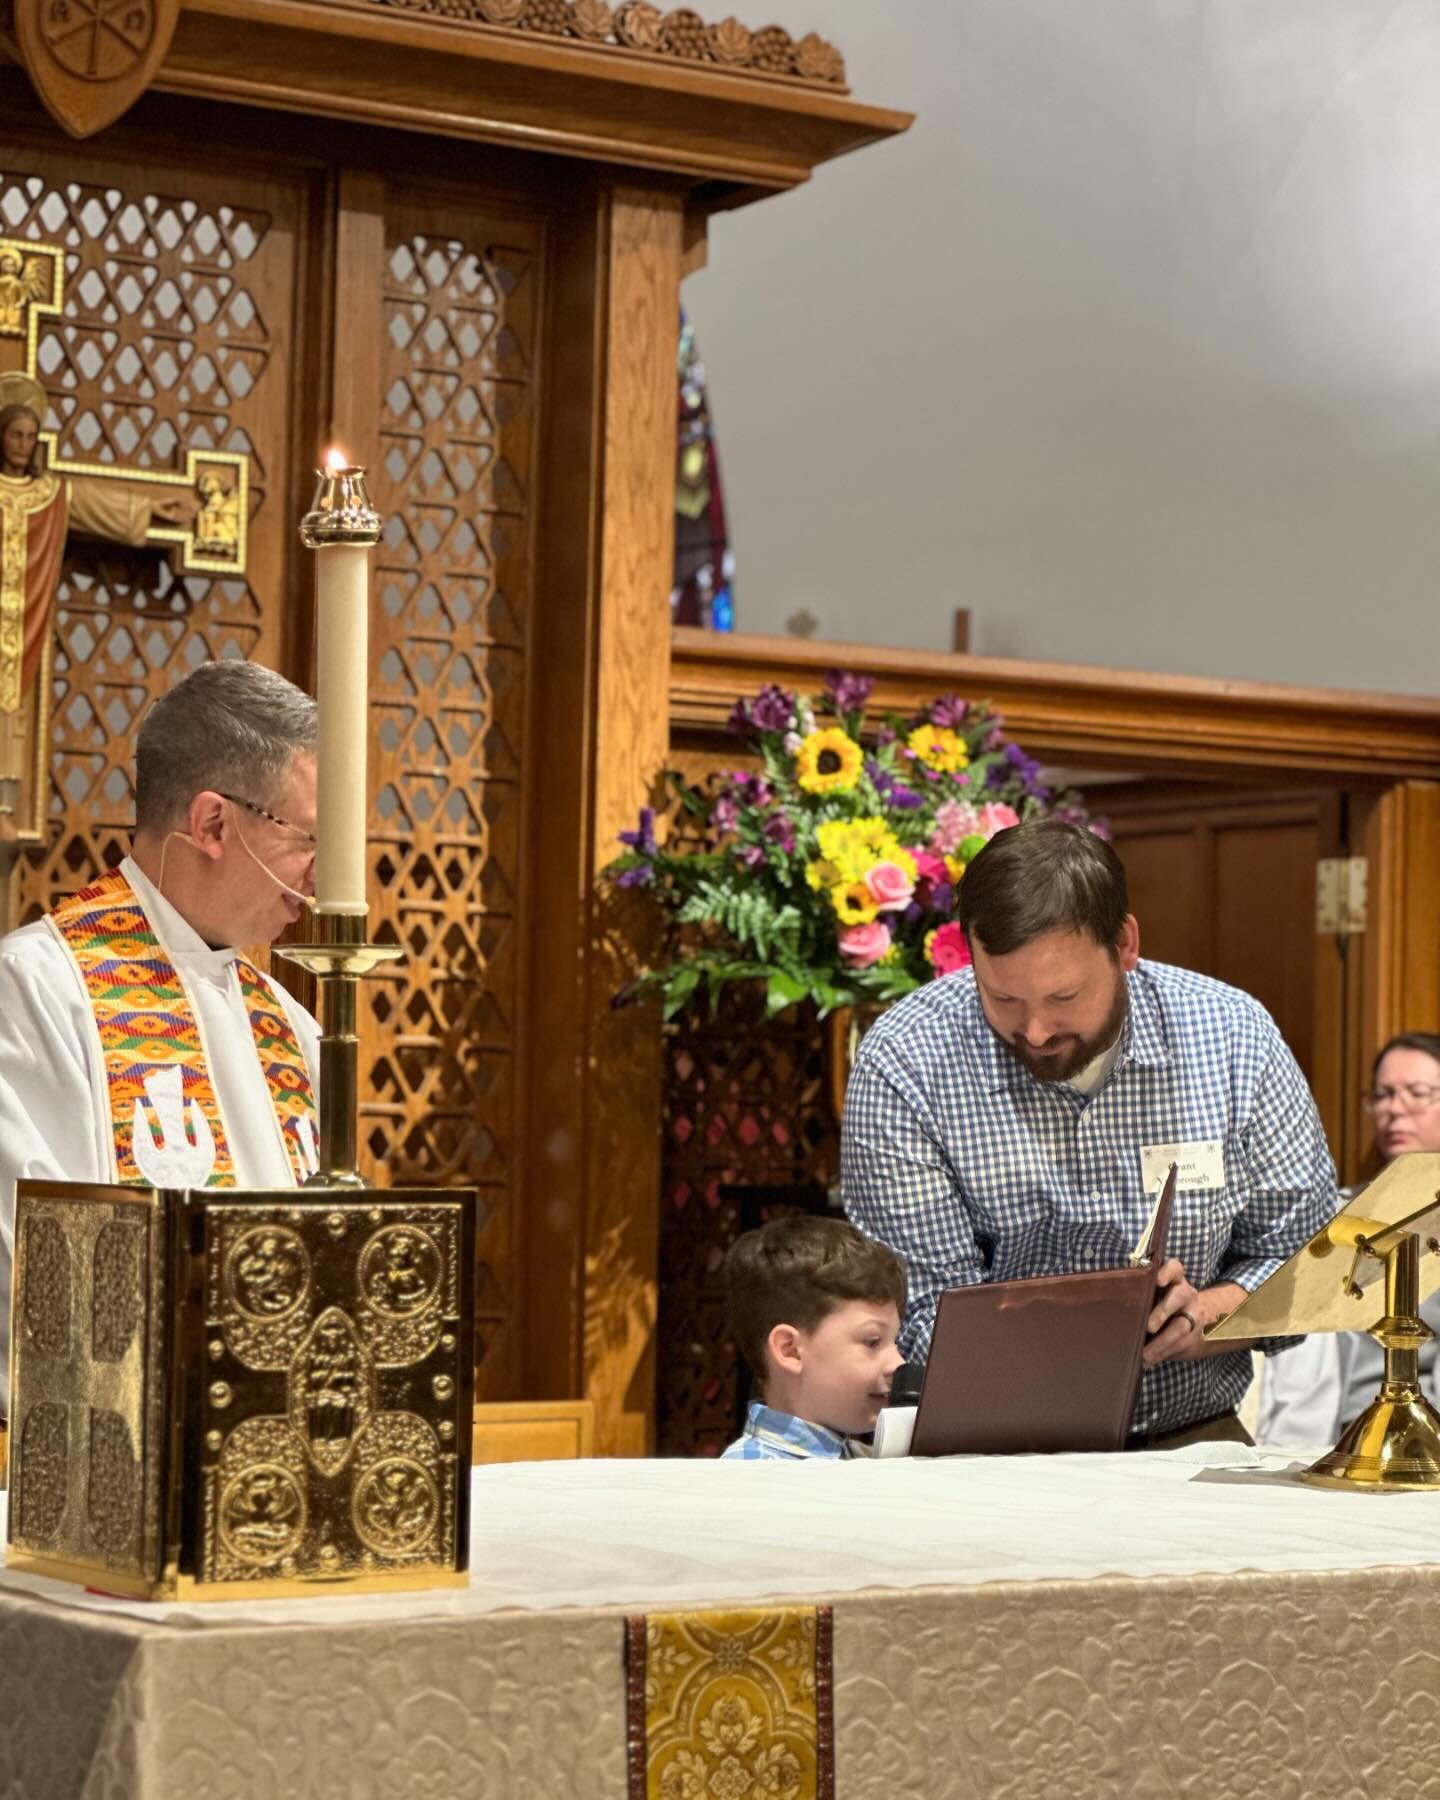 On the first Sunday of each month, St. Martin&rsquo;s has one 10:00 a.m. service with a meal afterward hosted by groups within the church and open to all.

On all other Sunday mornings, we offer three services at 8:00 a.m., 9:00 a.m., and 11:00 a.m. 